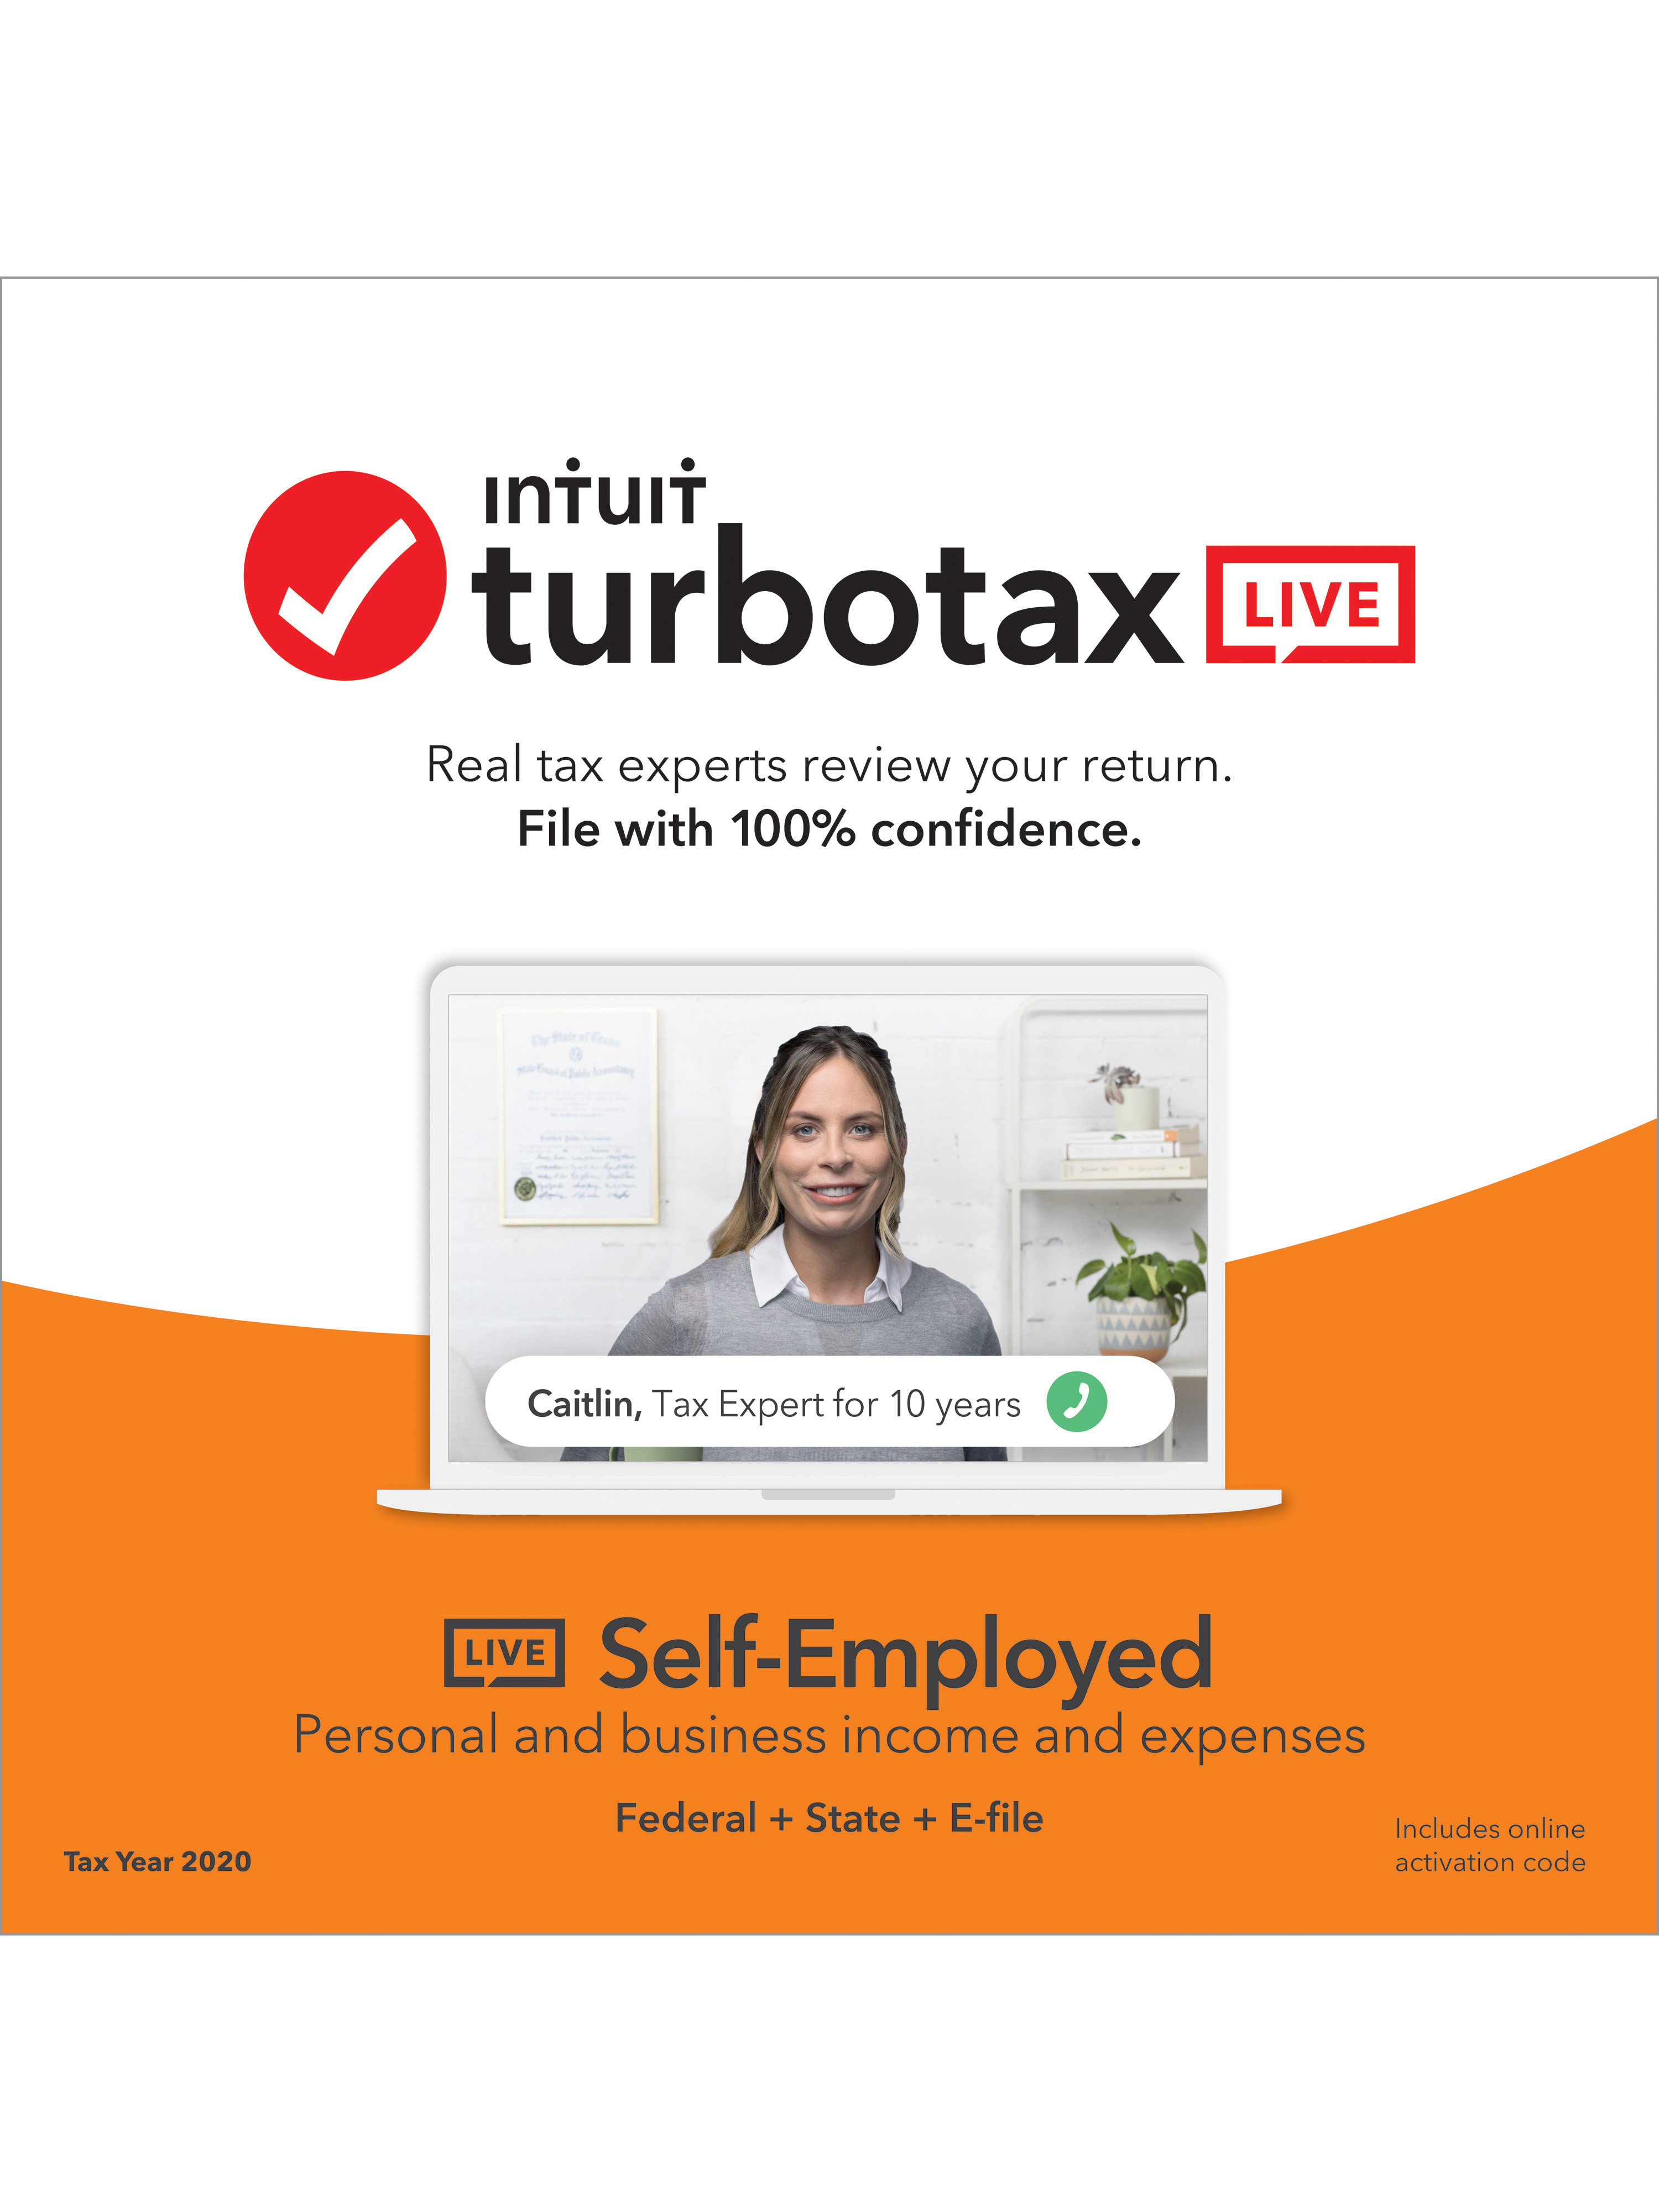 turbotax 2015 home and business news release